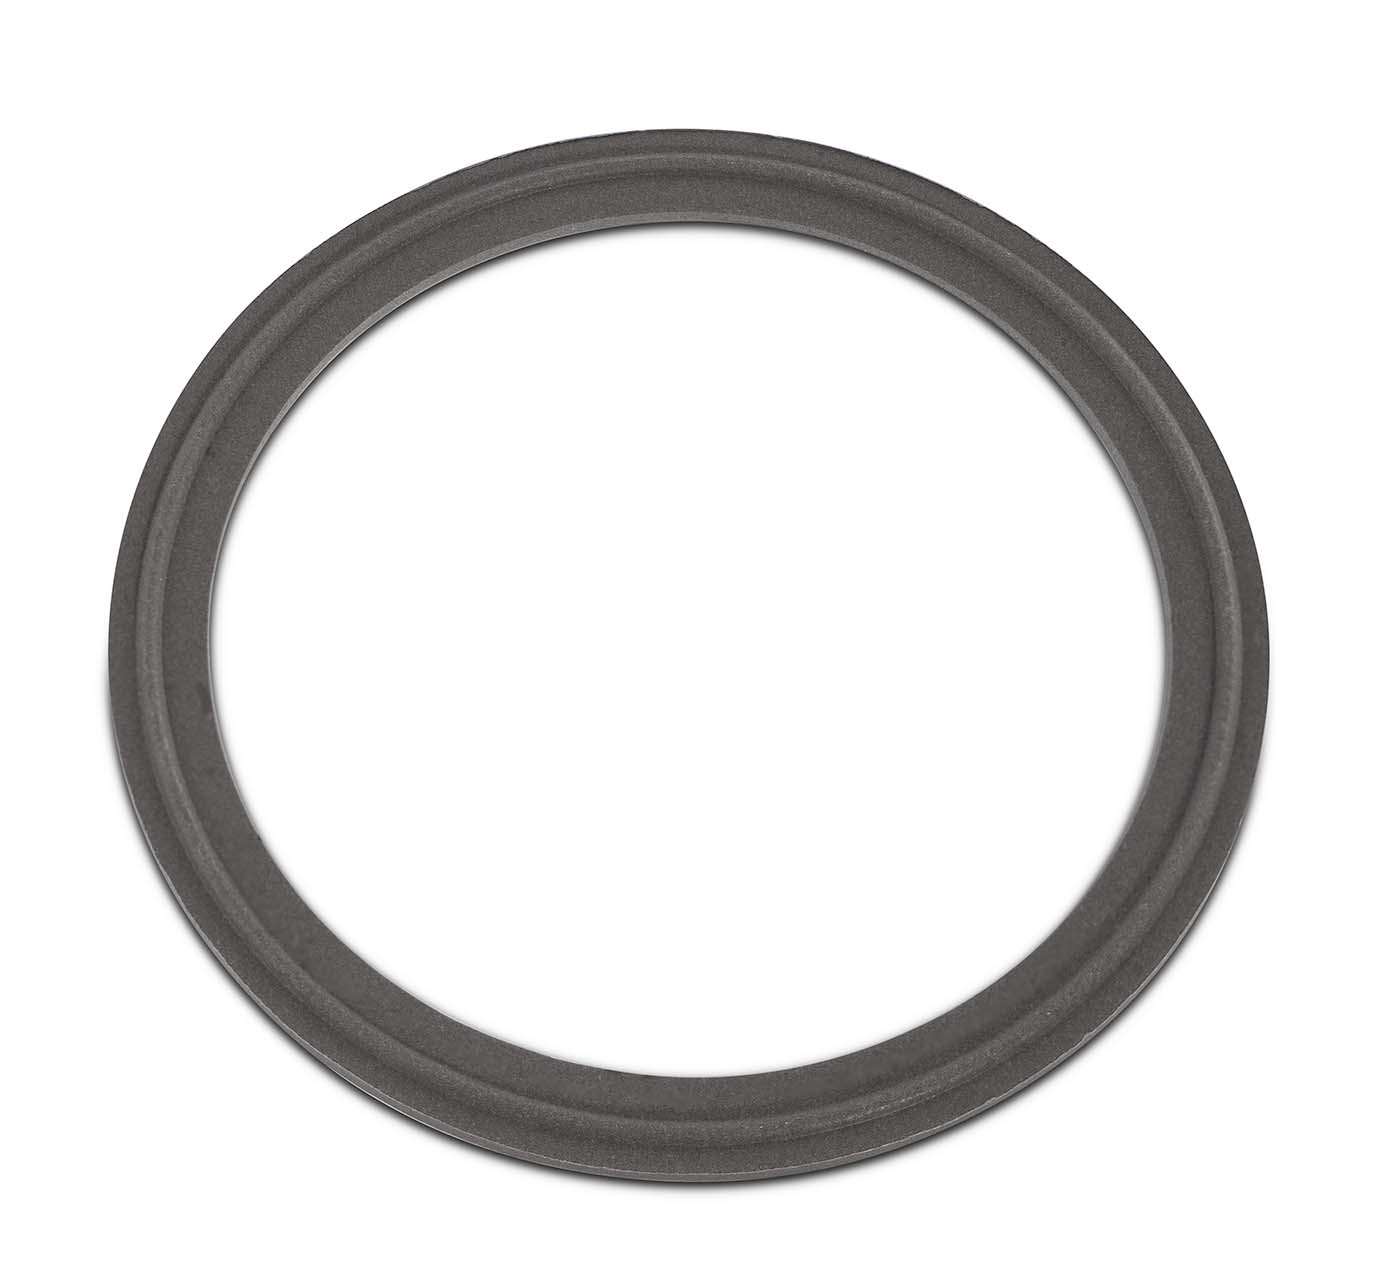 Tef-Steel PTFE / Stainless Steel Sanitary Tri-Clamp Gasket Shop All Categories BVV 4-inch